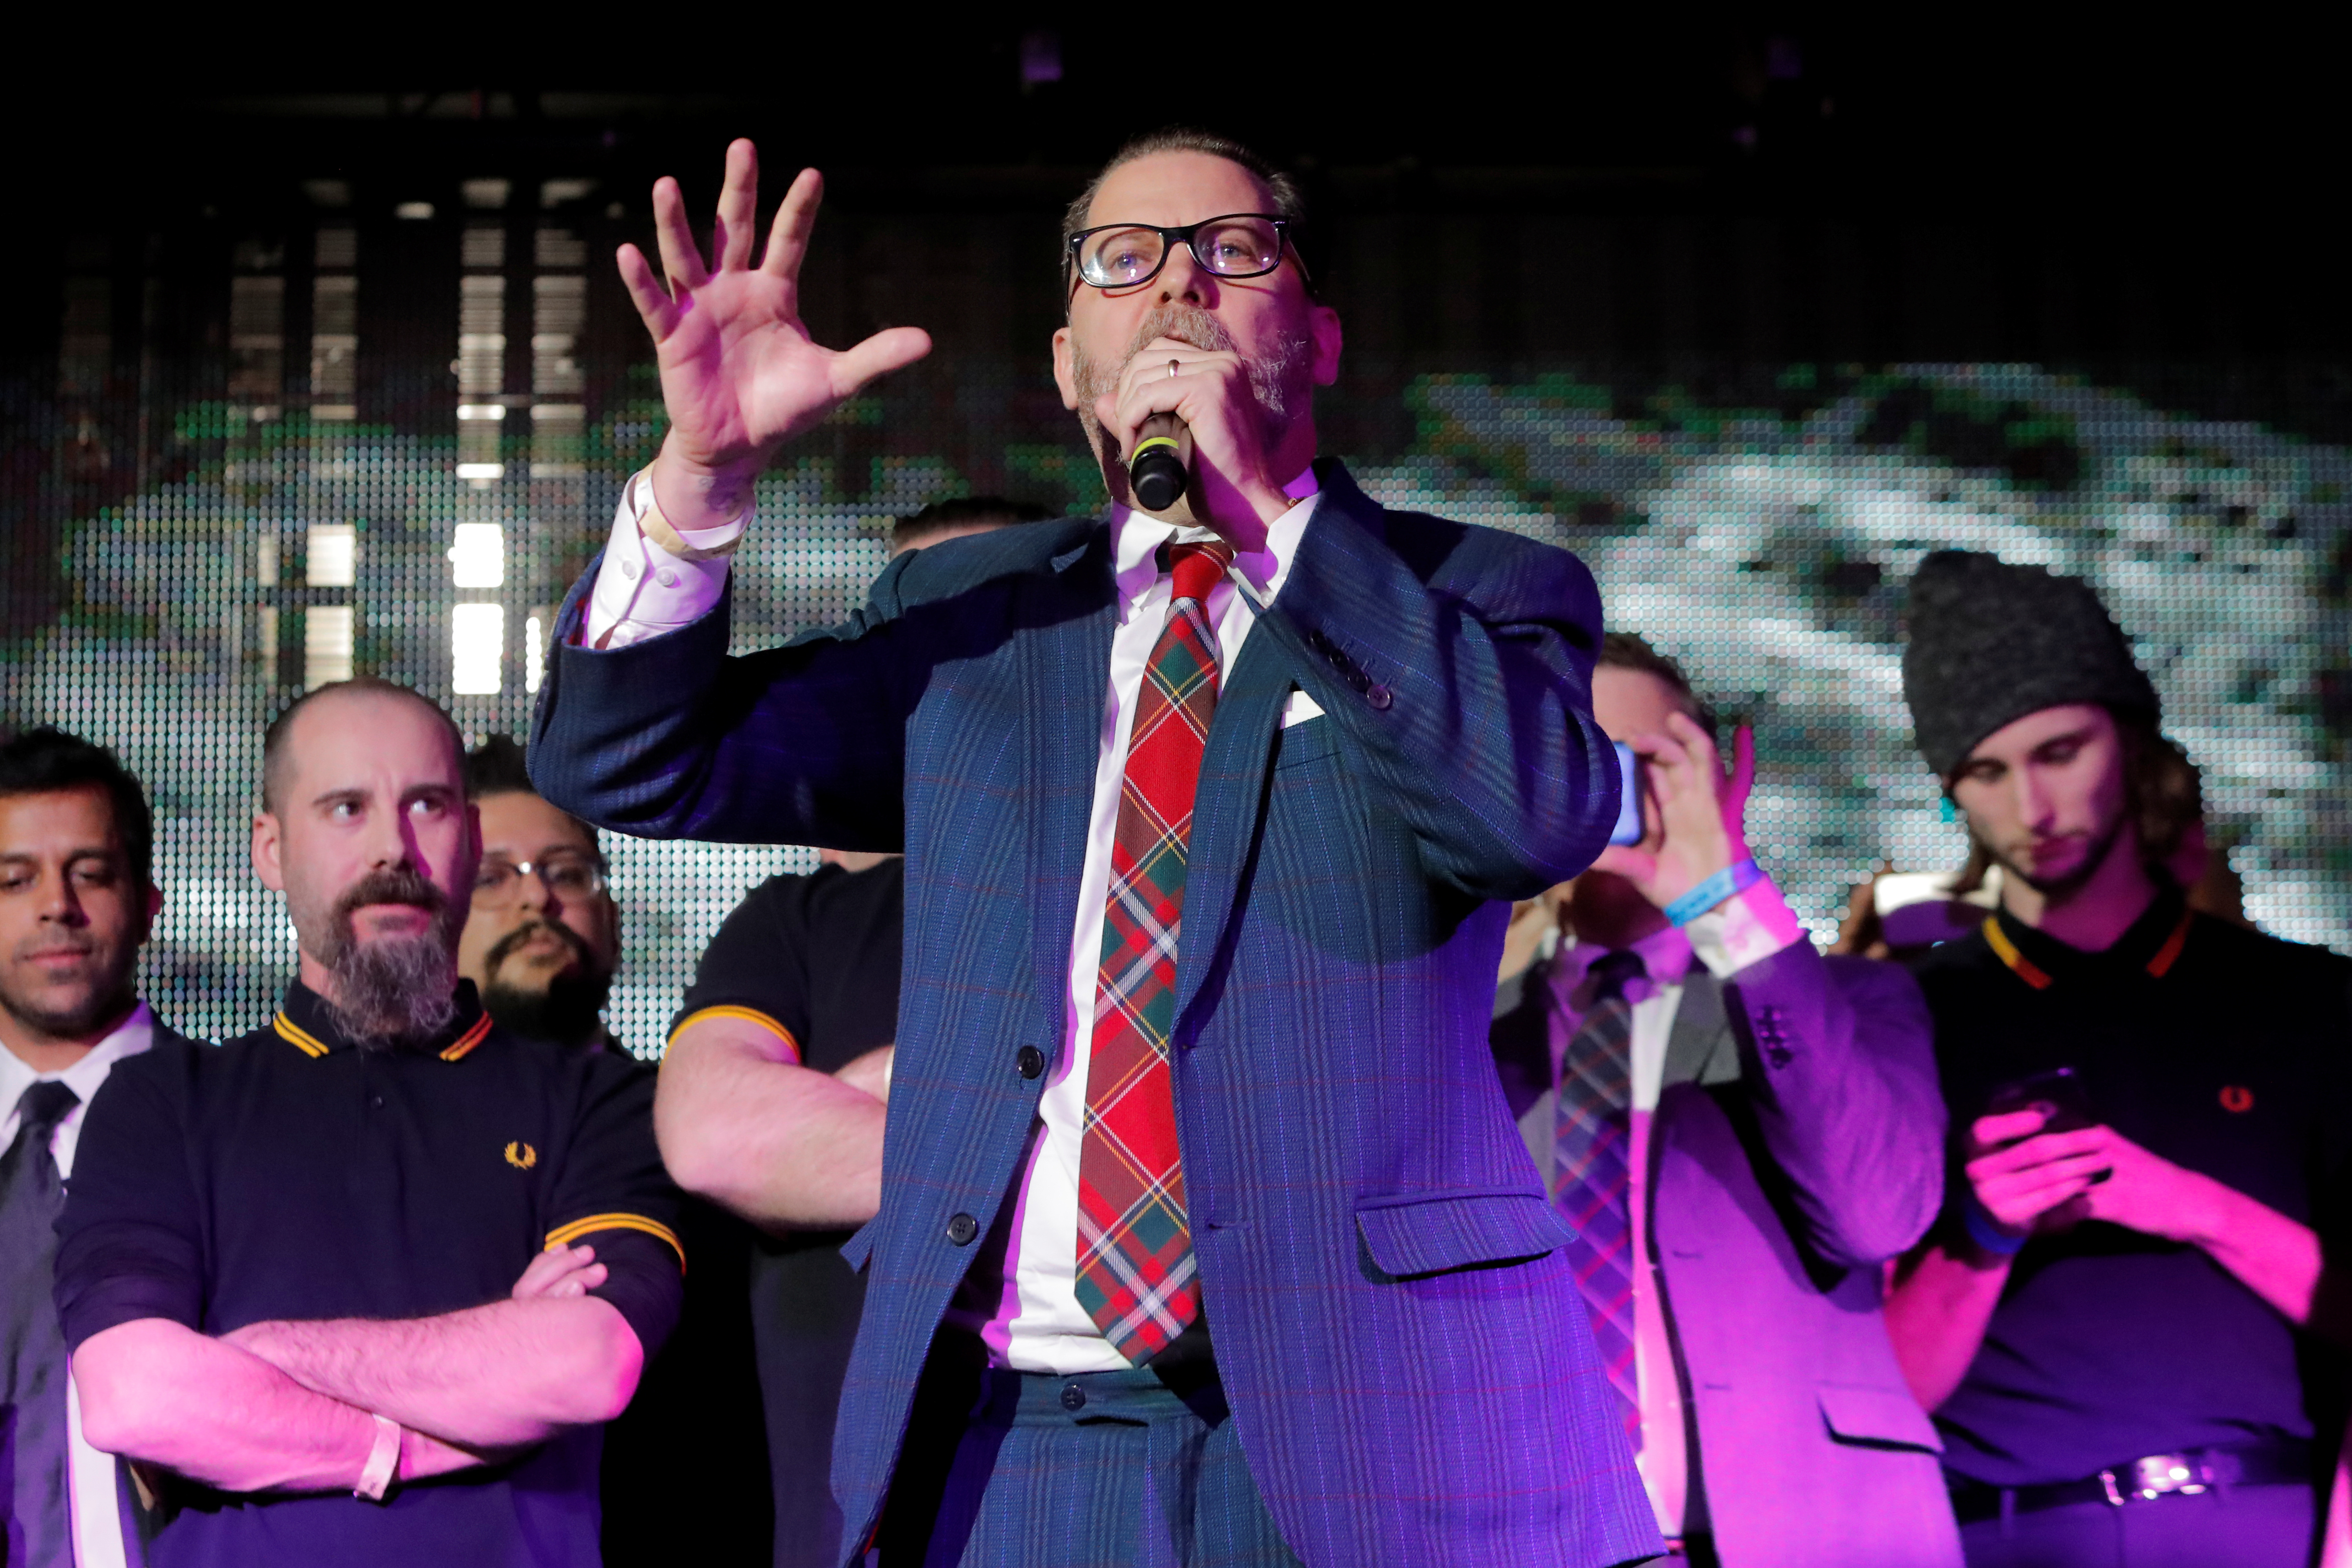 Vice magazine co-founder Gavin McInnes speaks on stage with members of the Proud Boys organization at the "A Night for Freedom" event organized by Mike Cernovich, in Manhattan, New York, U.S., January 20, 2018. REUTERS/Andrew Kelly - RC11C4A4AE40